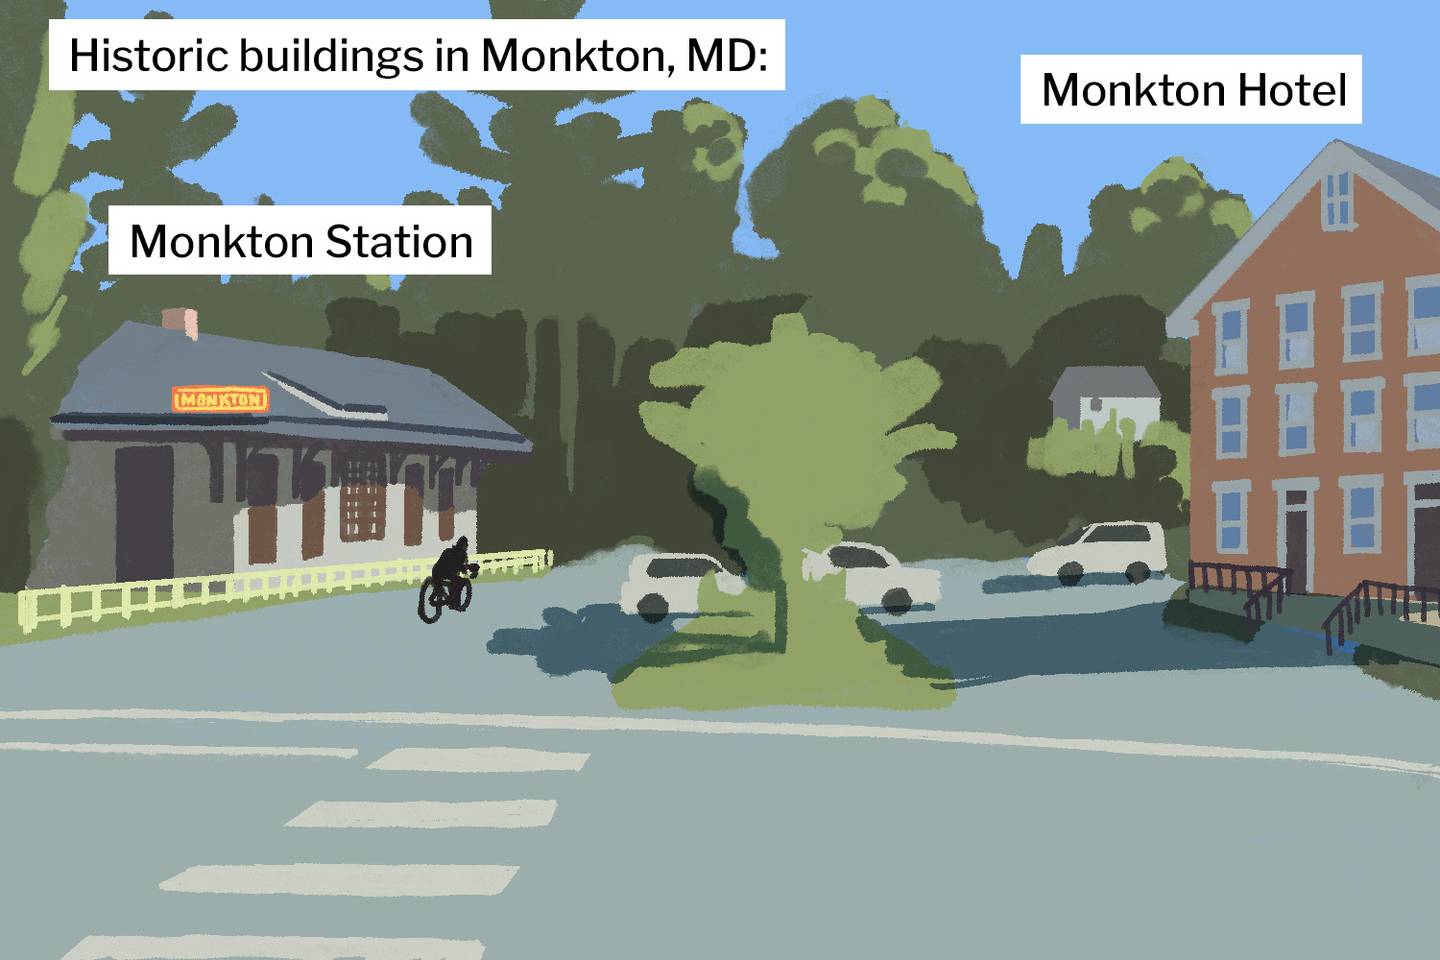 Illustration of two historic buildings in Monkton, Maryland, with trail receding into woods in between them. On left is a short gray building with a red sign on its roof that says Monkton, and is labeled "Monkton Station." On right is a three-story brick building with many white-trimmed windows, labeled "Monkton Hotel."